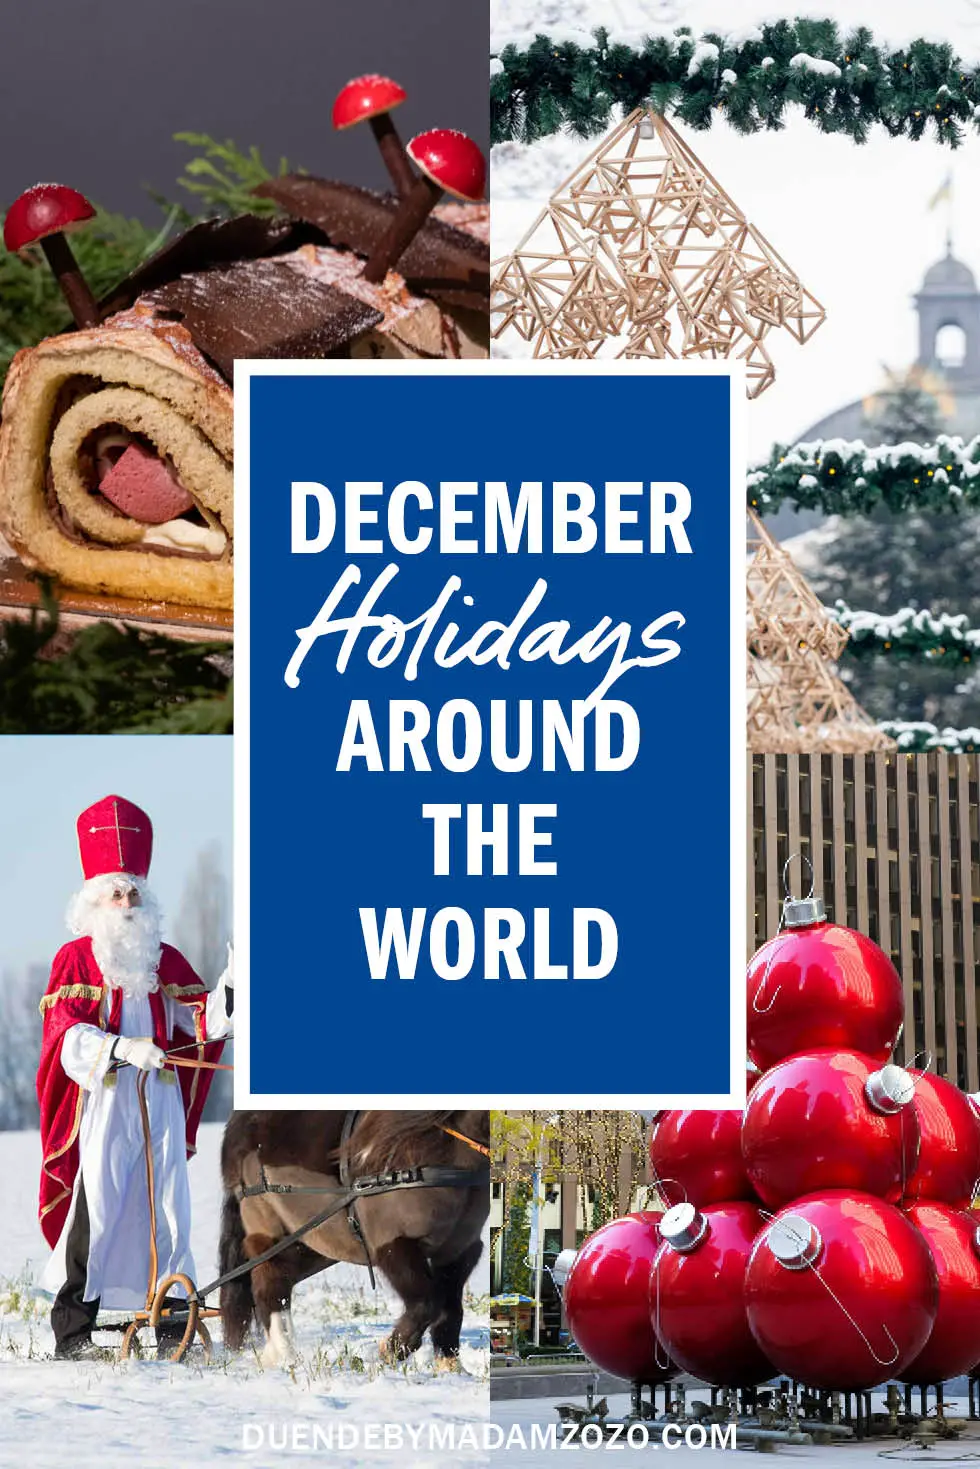 Images of different December holidays with title "December Holidays Around the World"